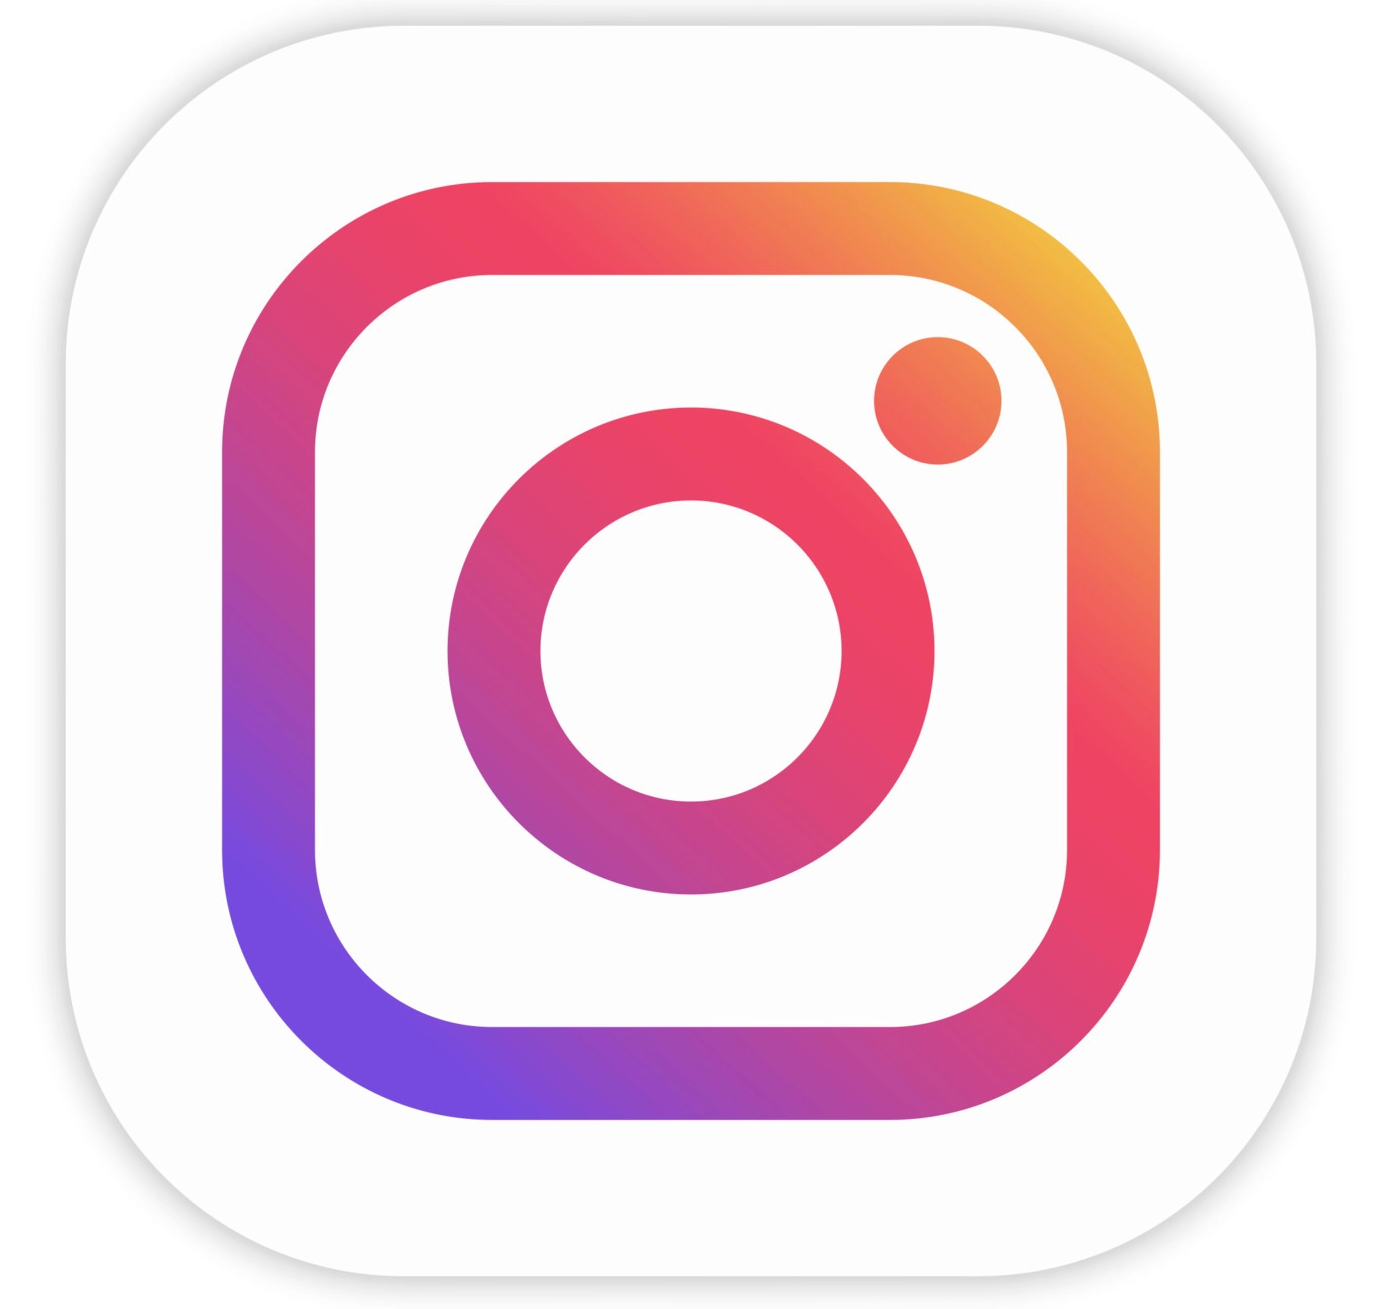 instagram-app-icon-on-white-background-isolated-social-media-button-free-vector